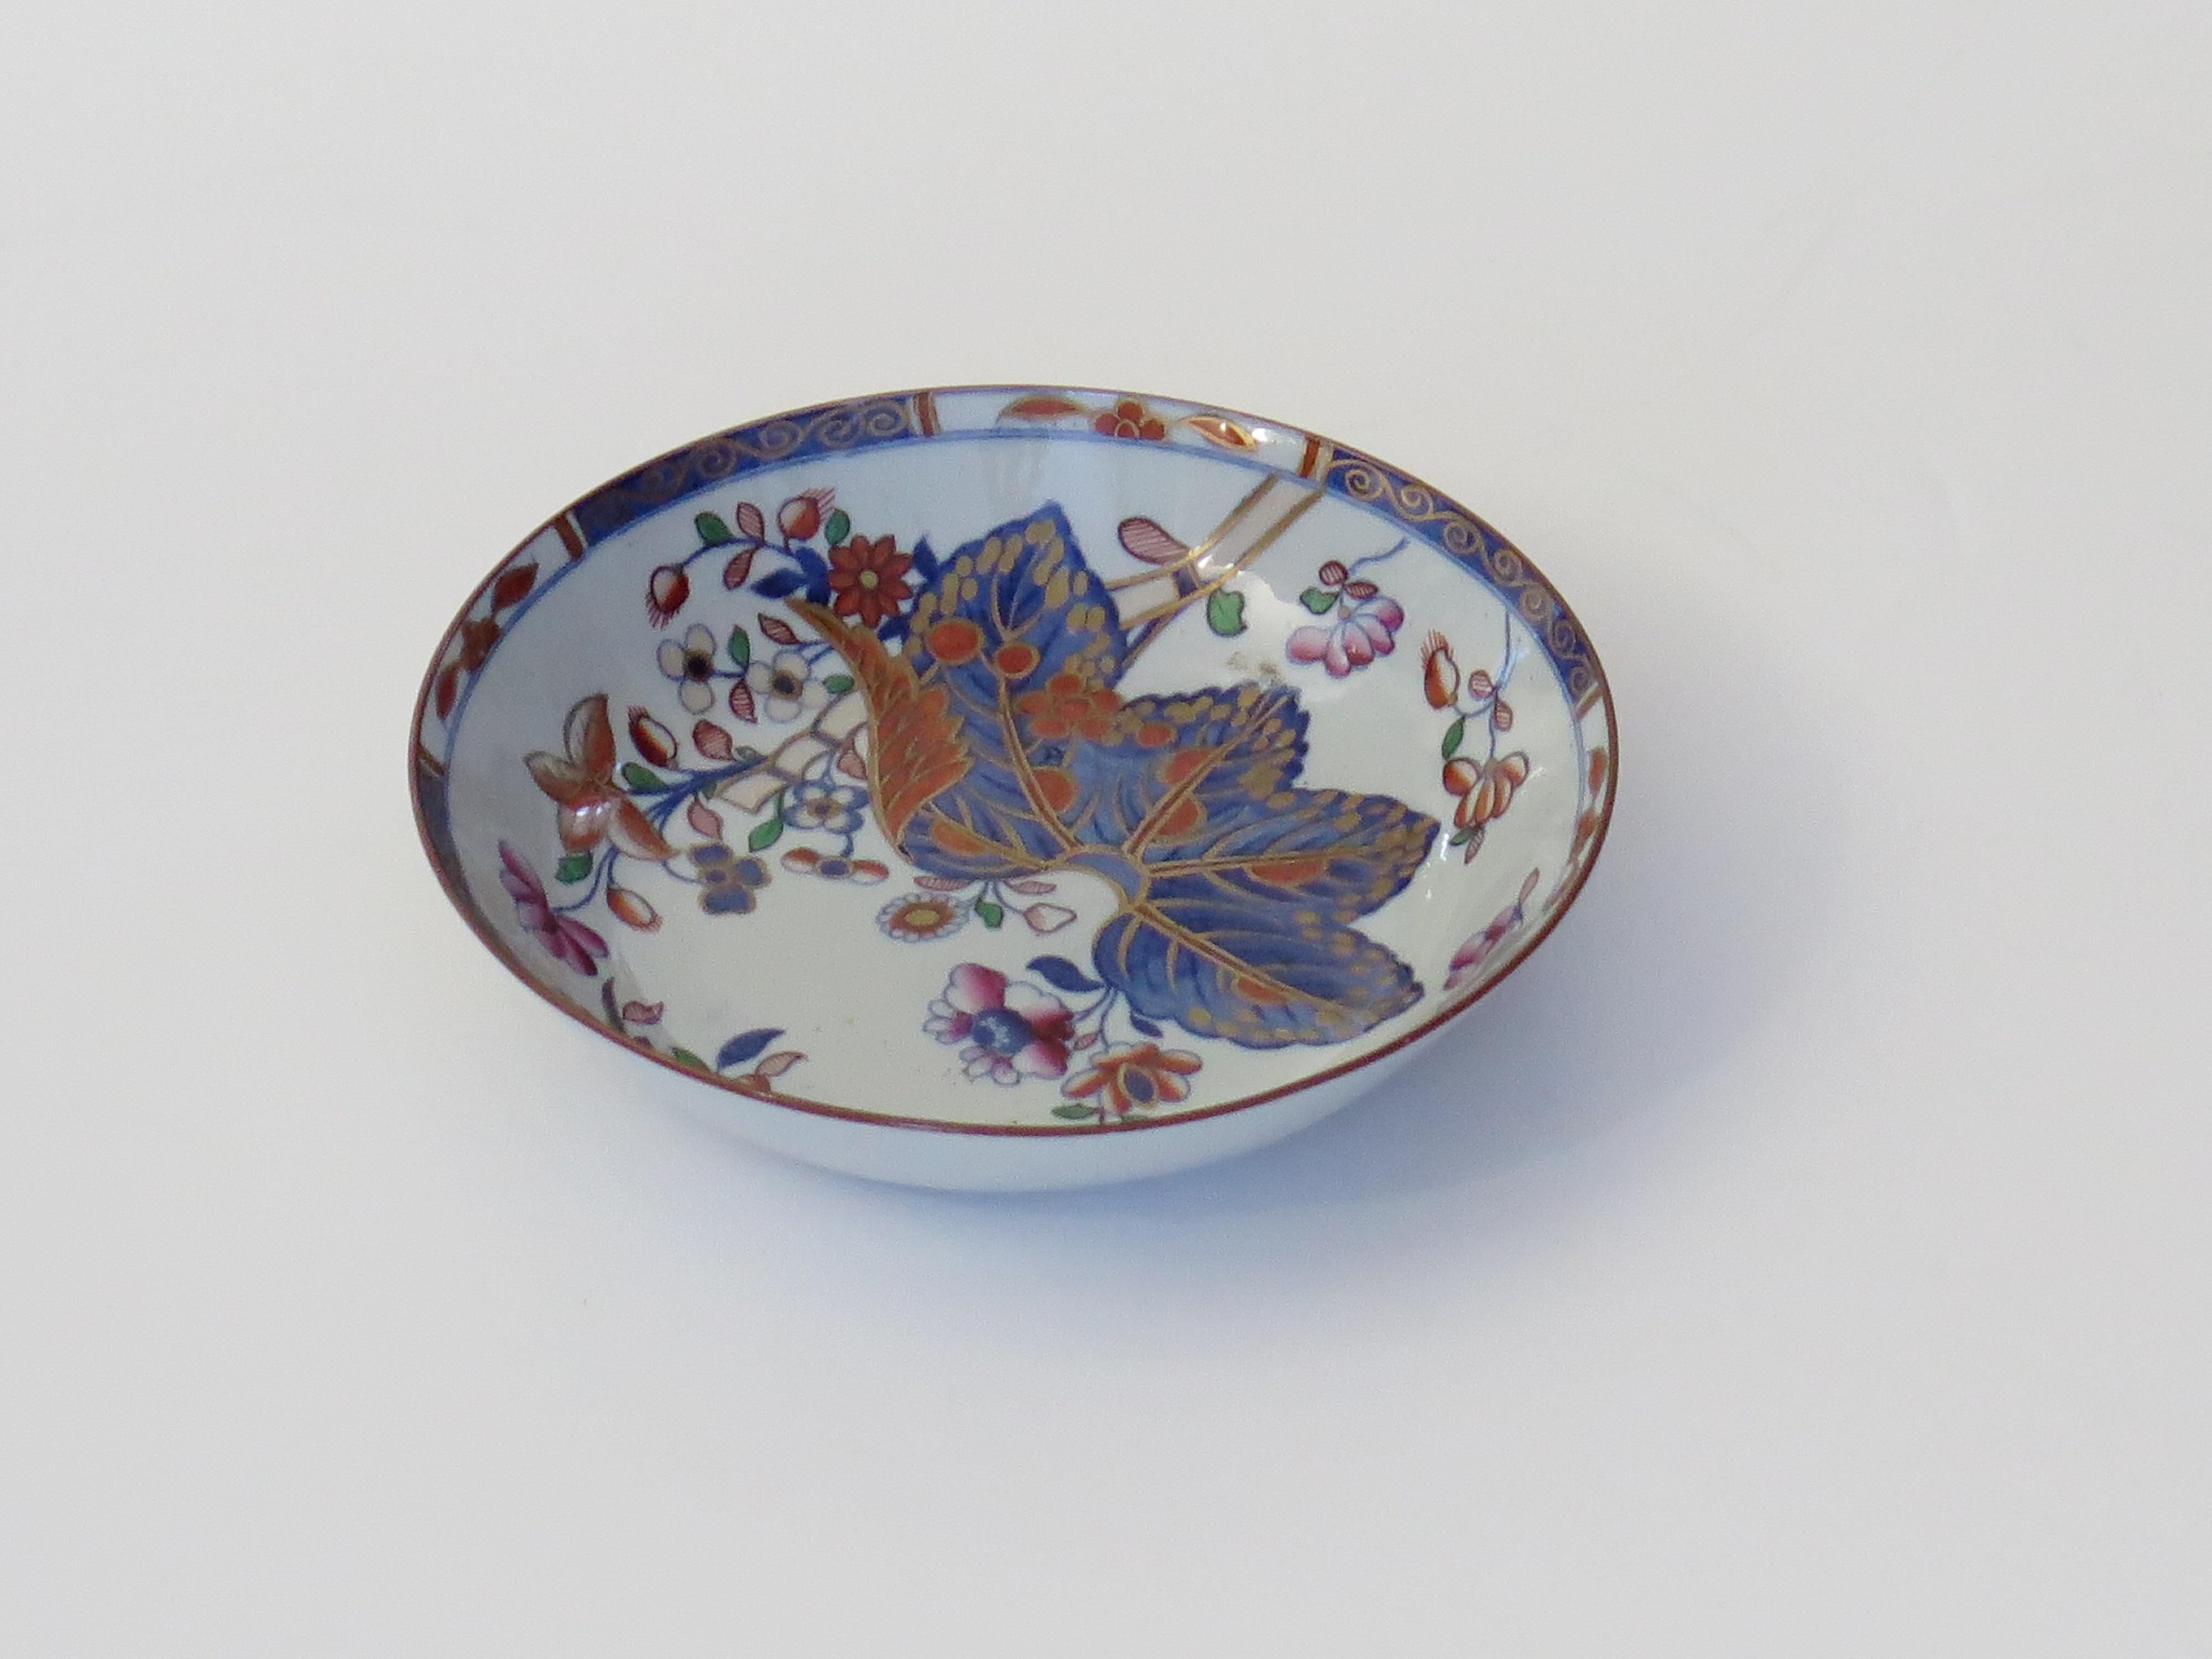 This is a very good stone China (Ironstone pottery) Dish or small bowl, hand painted in the tobacco leaf pattern, number 2061, made by the Spode factory in the early 19th century, English Georgian period, circa 1820.

The dish is made from Ironstone